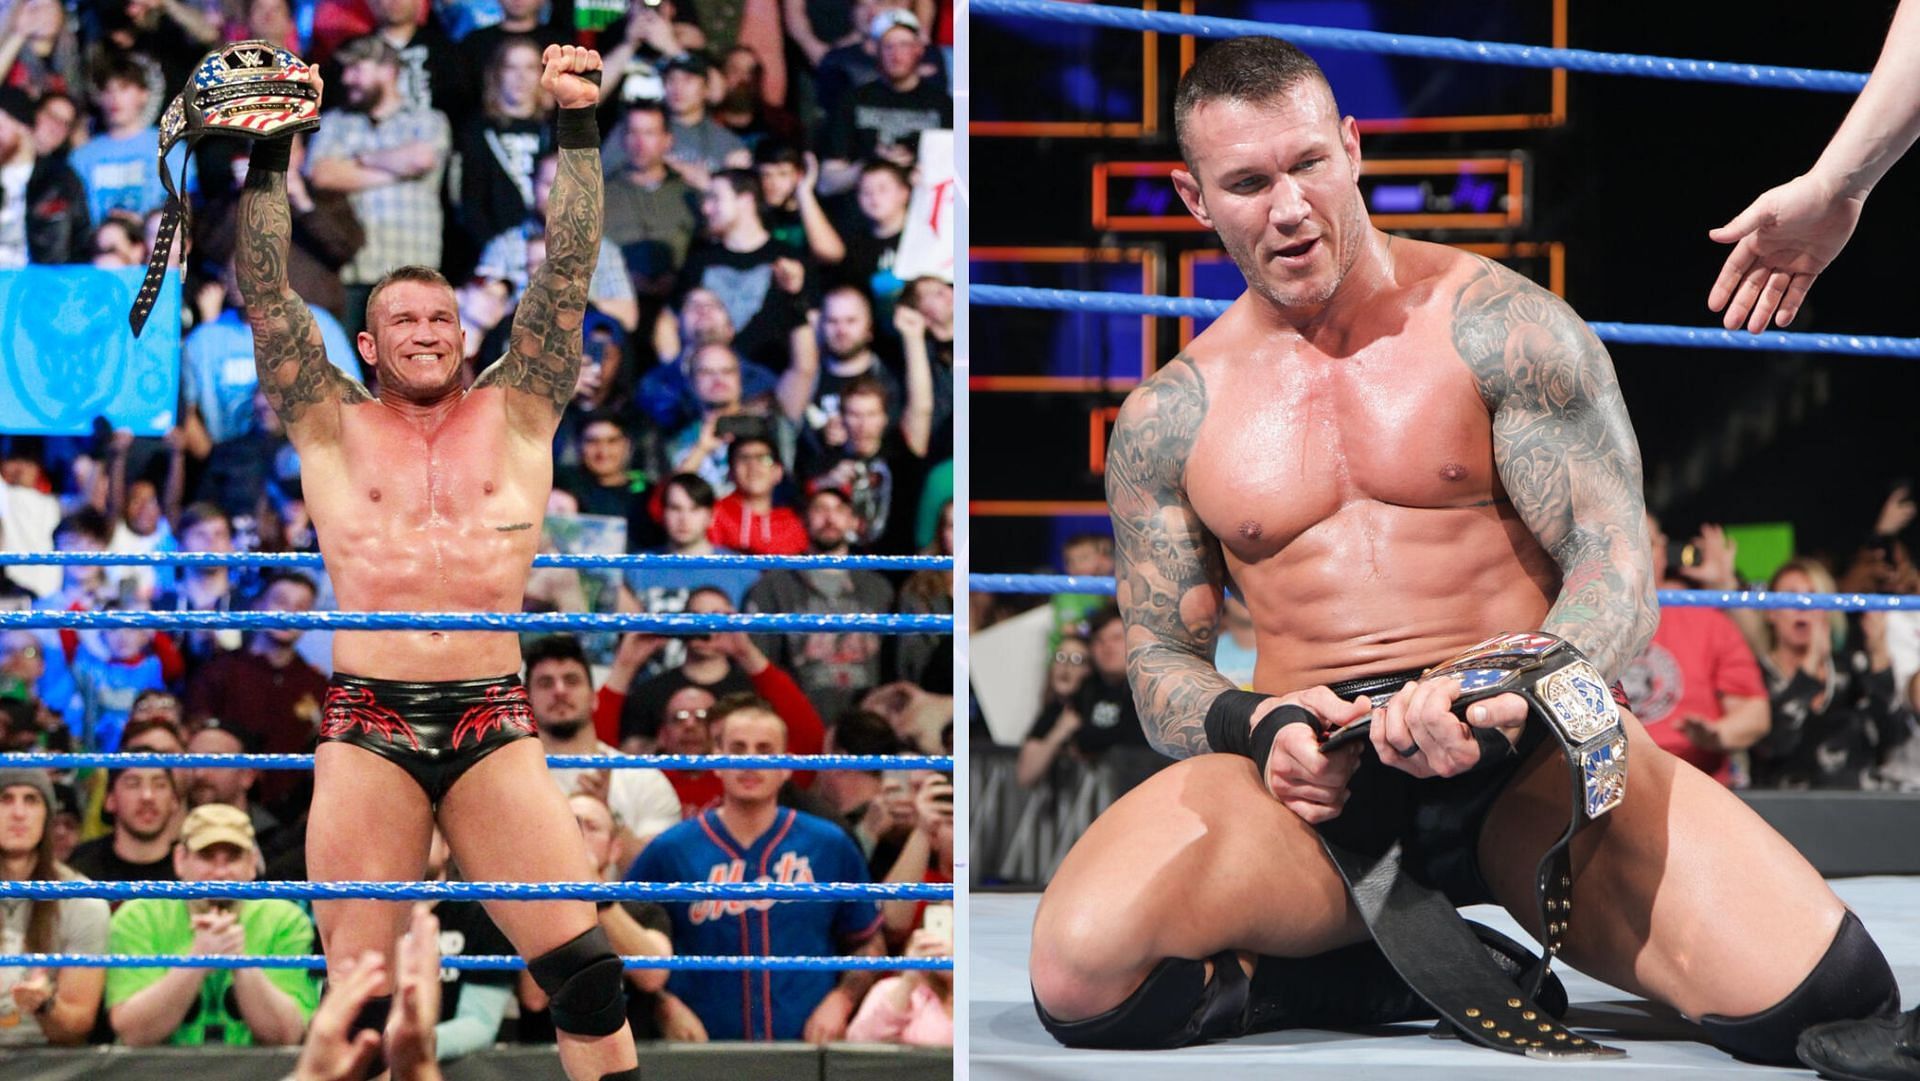 Randy Orton is scheduled for WrestleMania 40.